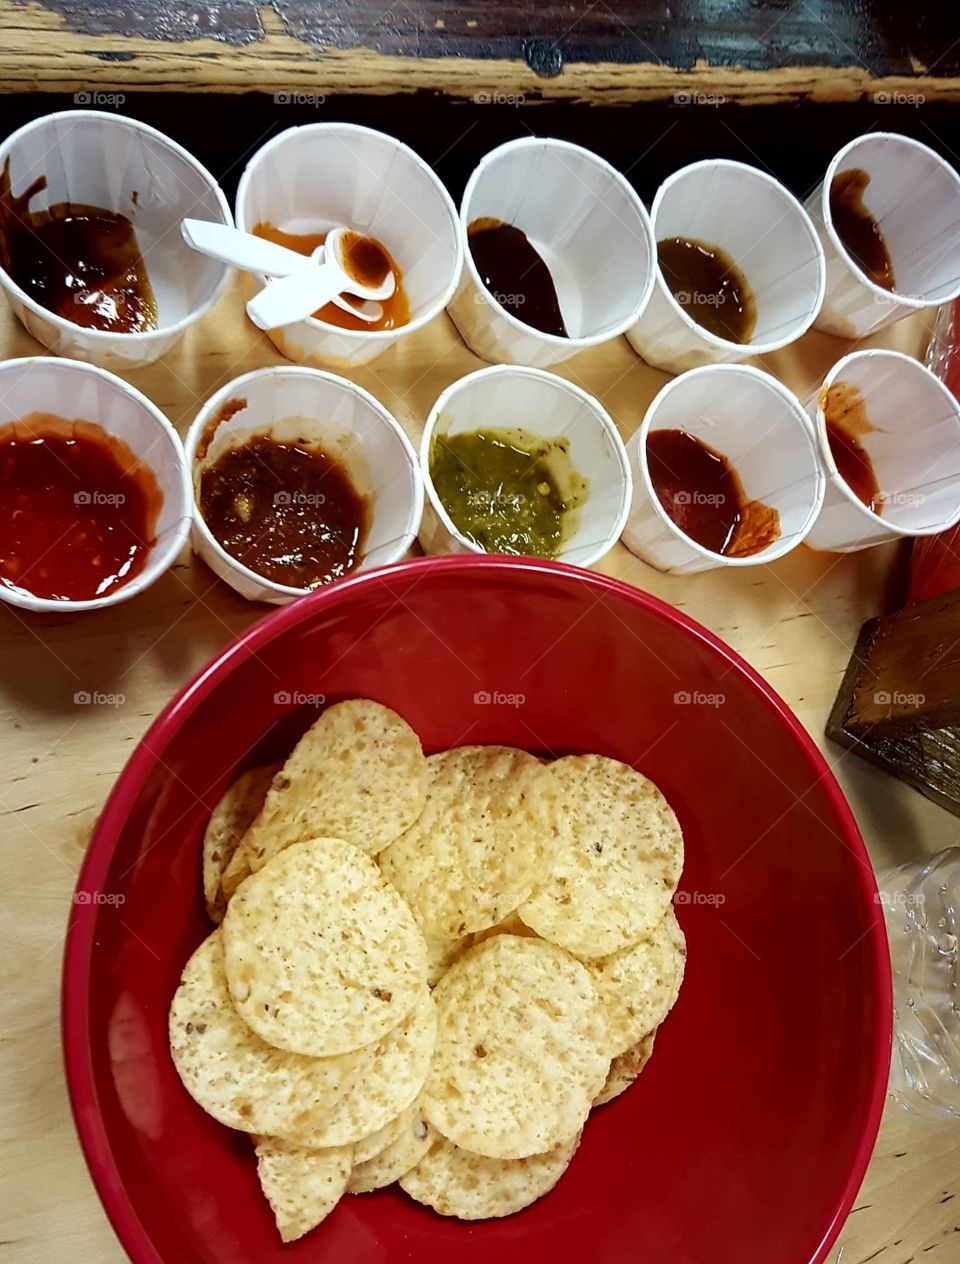 Tortilla chips in a colorful bowl with a sampling of different hot sauces